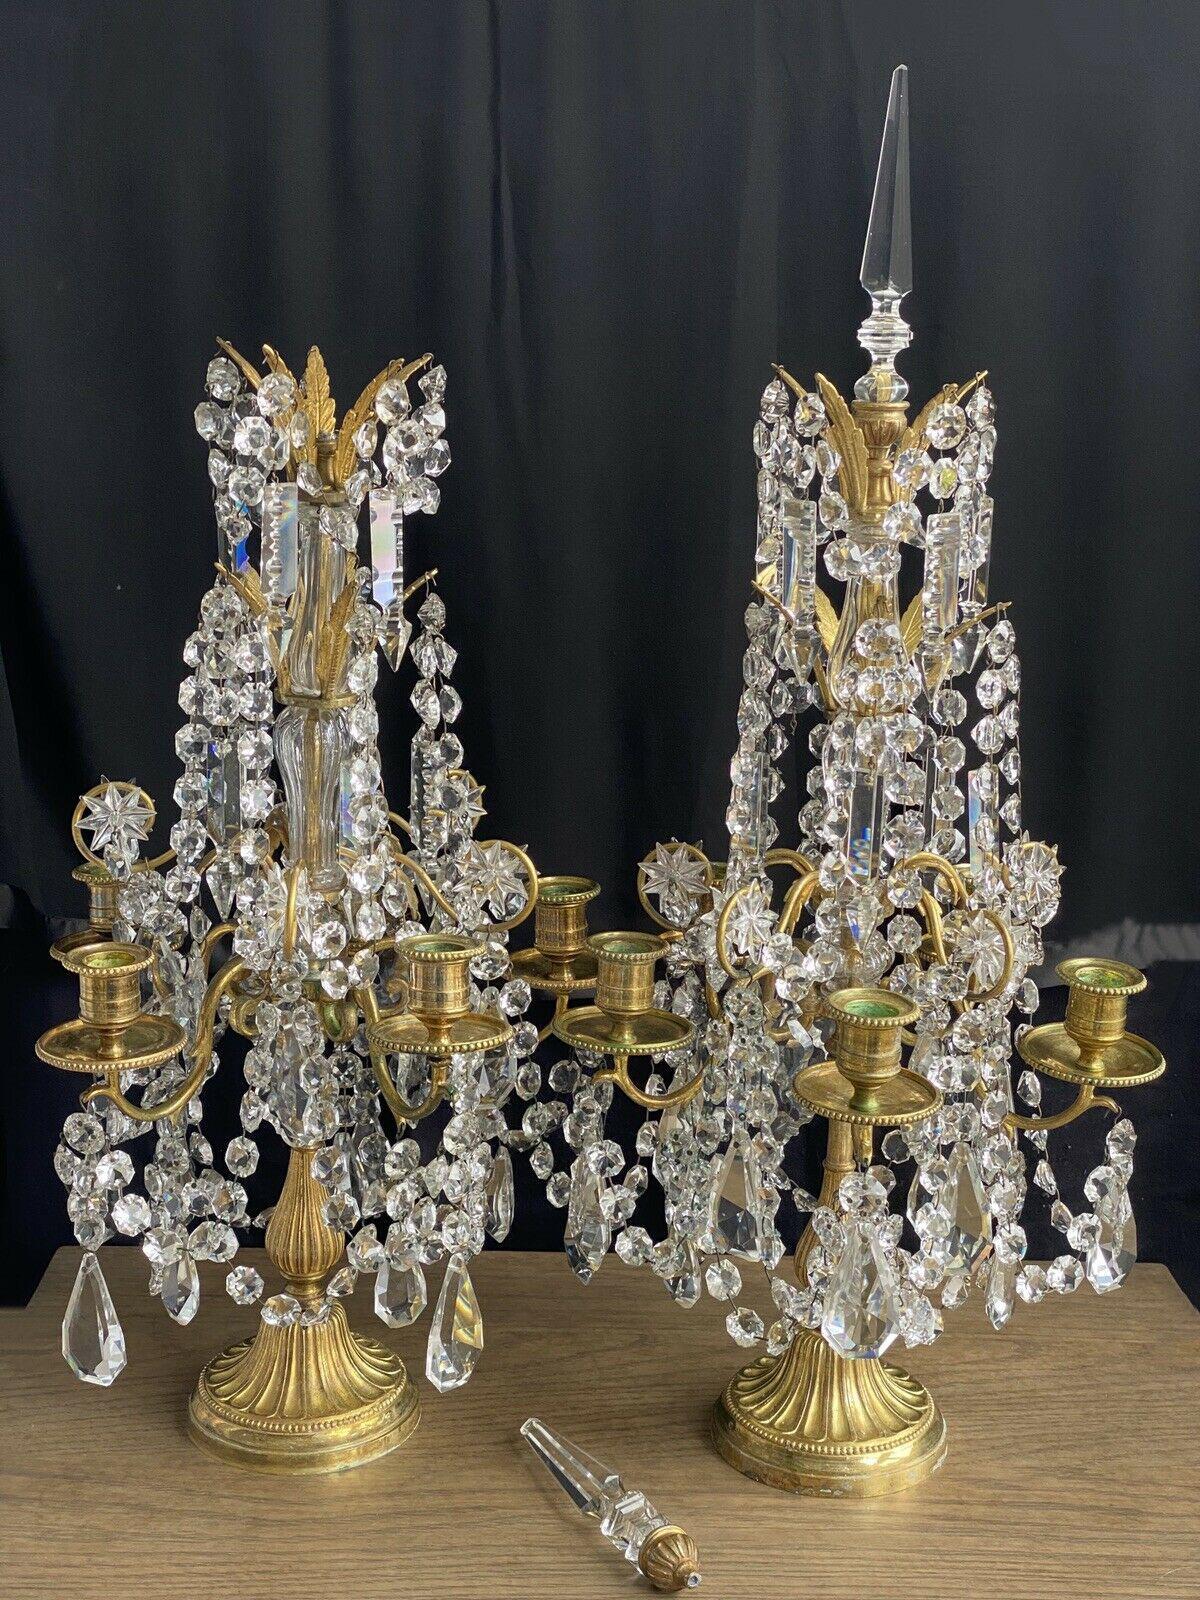 Pair 19thc French Baccarat Attributed Gilt Bronze with Cut Crystal Girandoles/ Table Lamps/ Candelabra. Ultr high quality. Highly detailed. French estate acquisition.